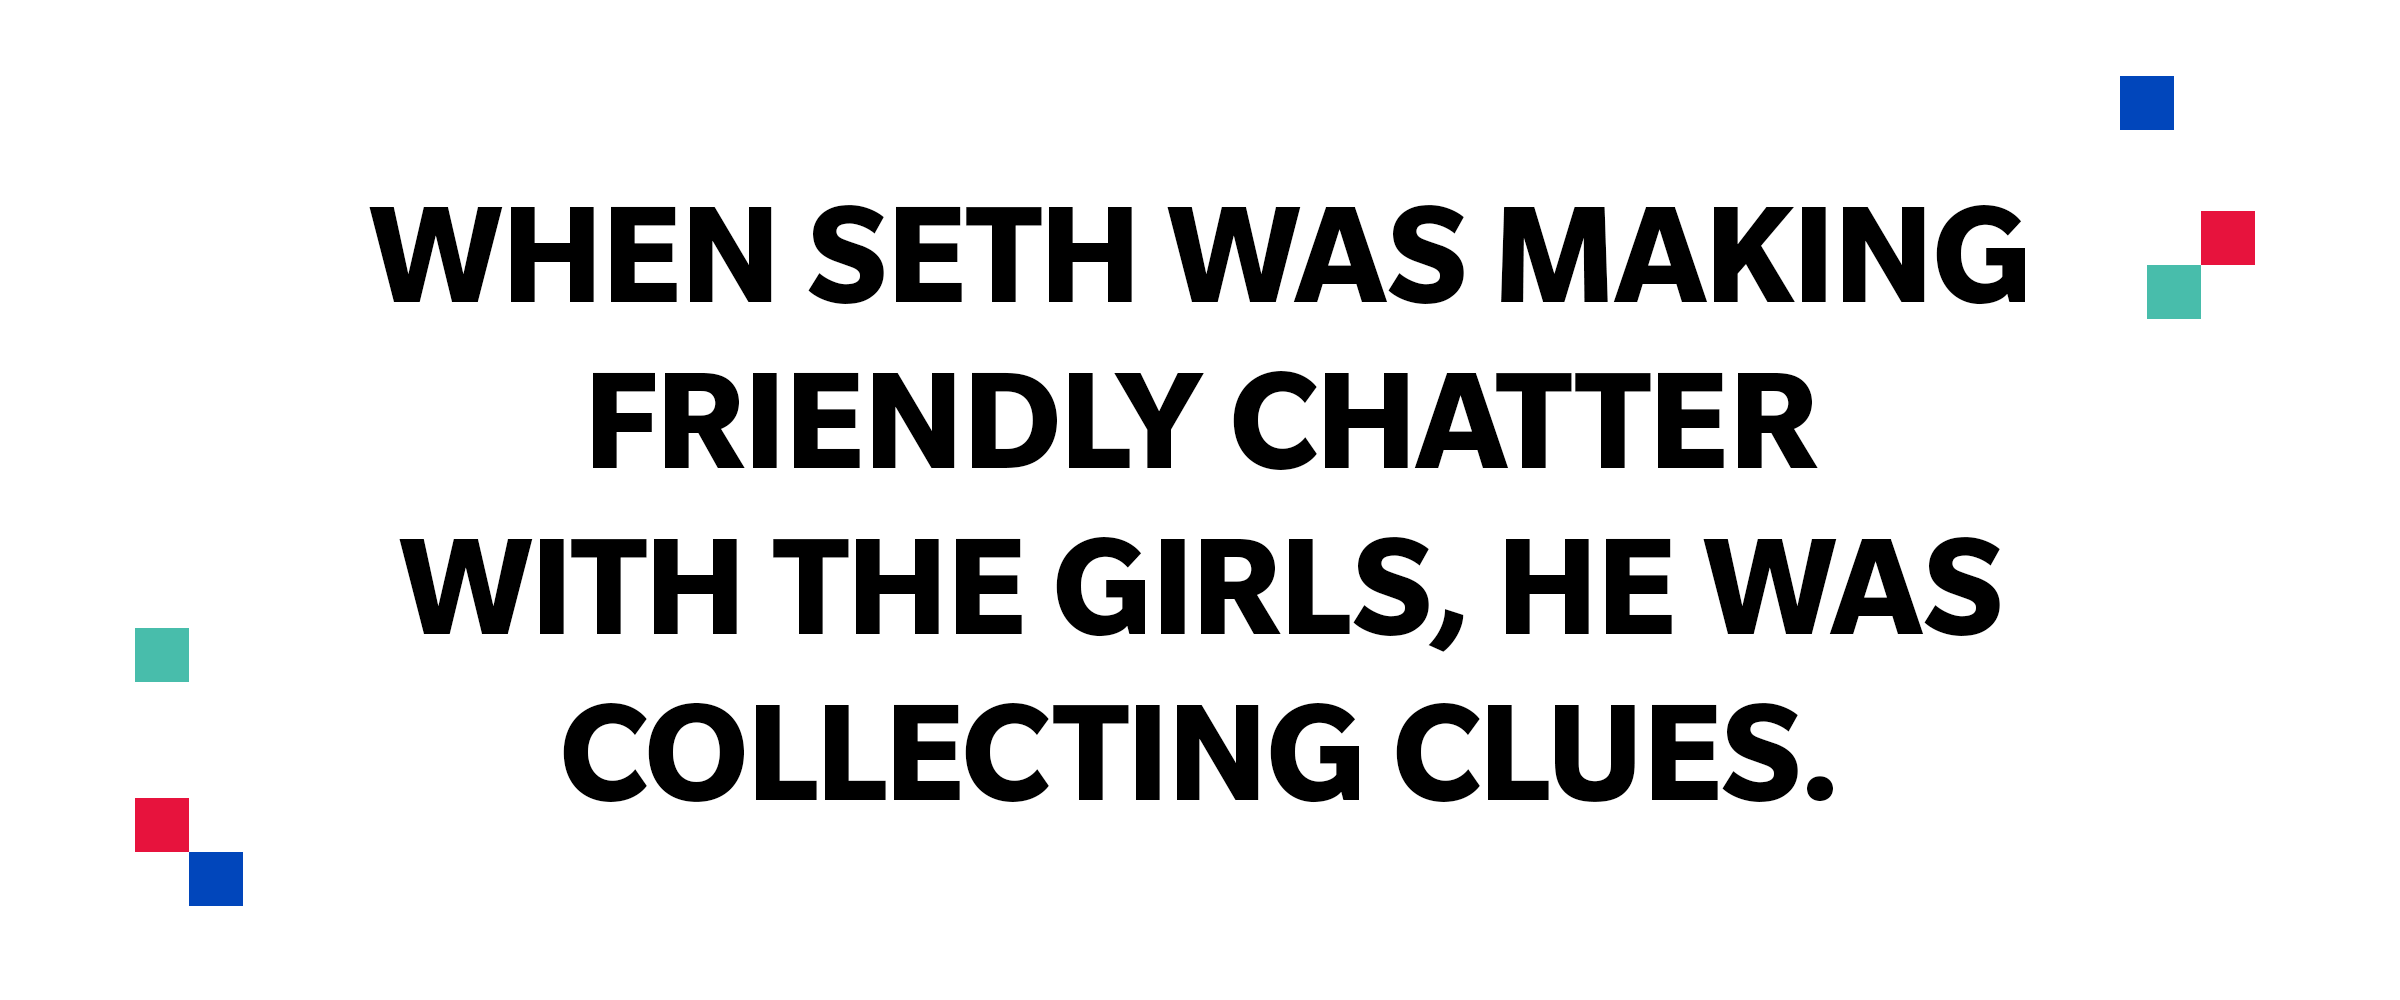 Large quote: When Seth was making friendly chatter with the girls, he was collecting clues.